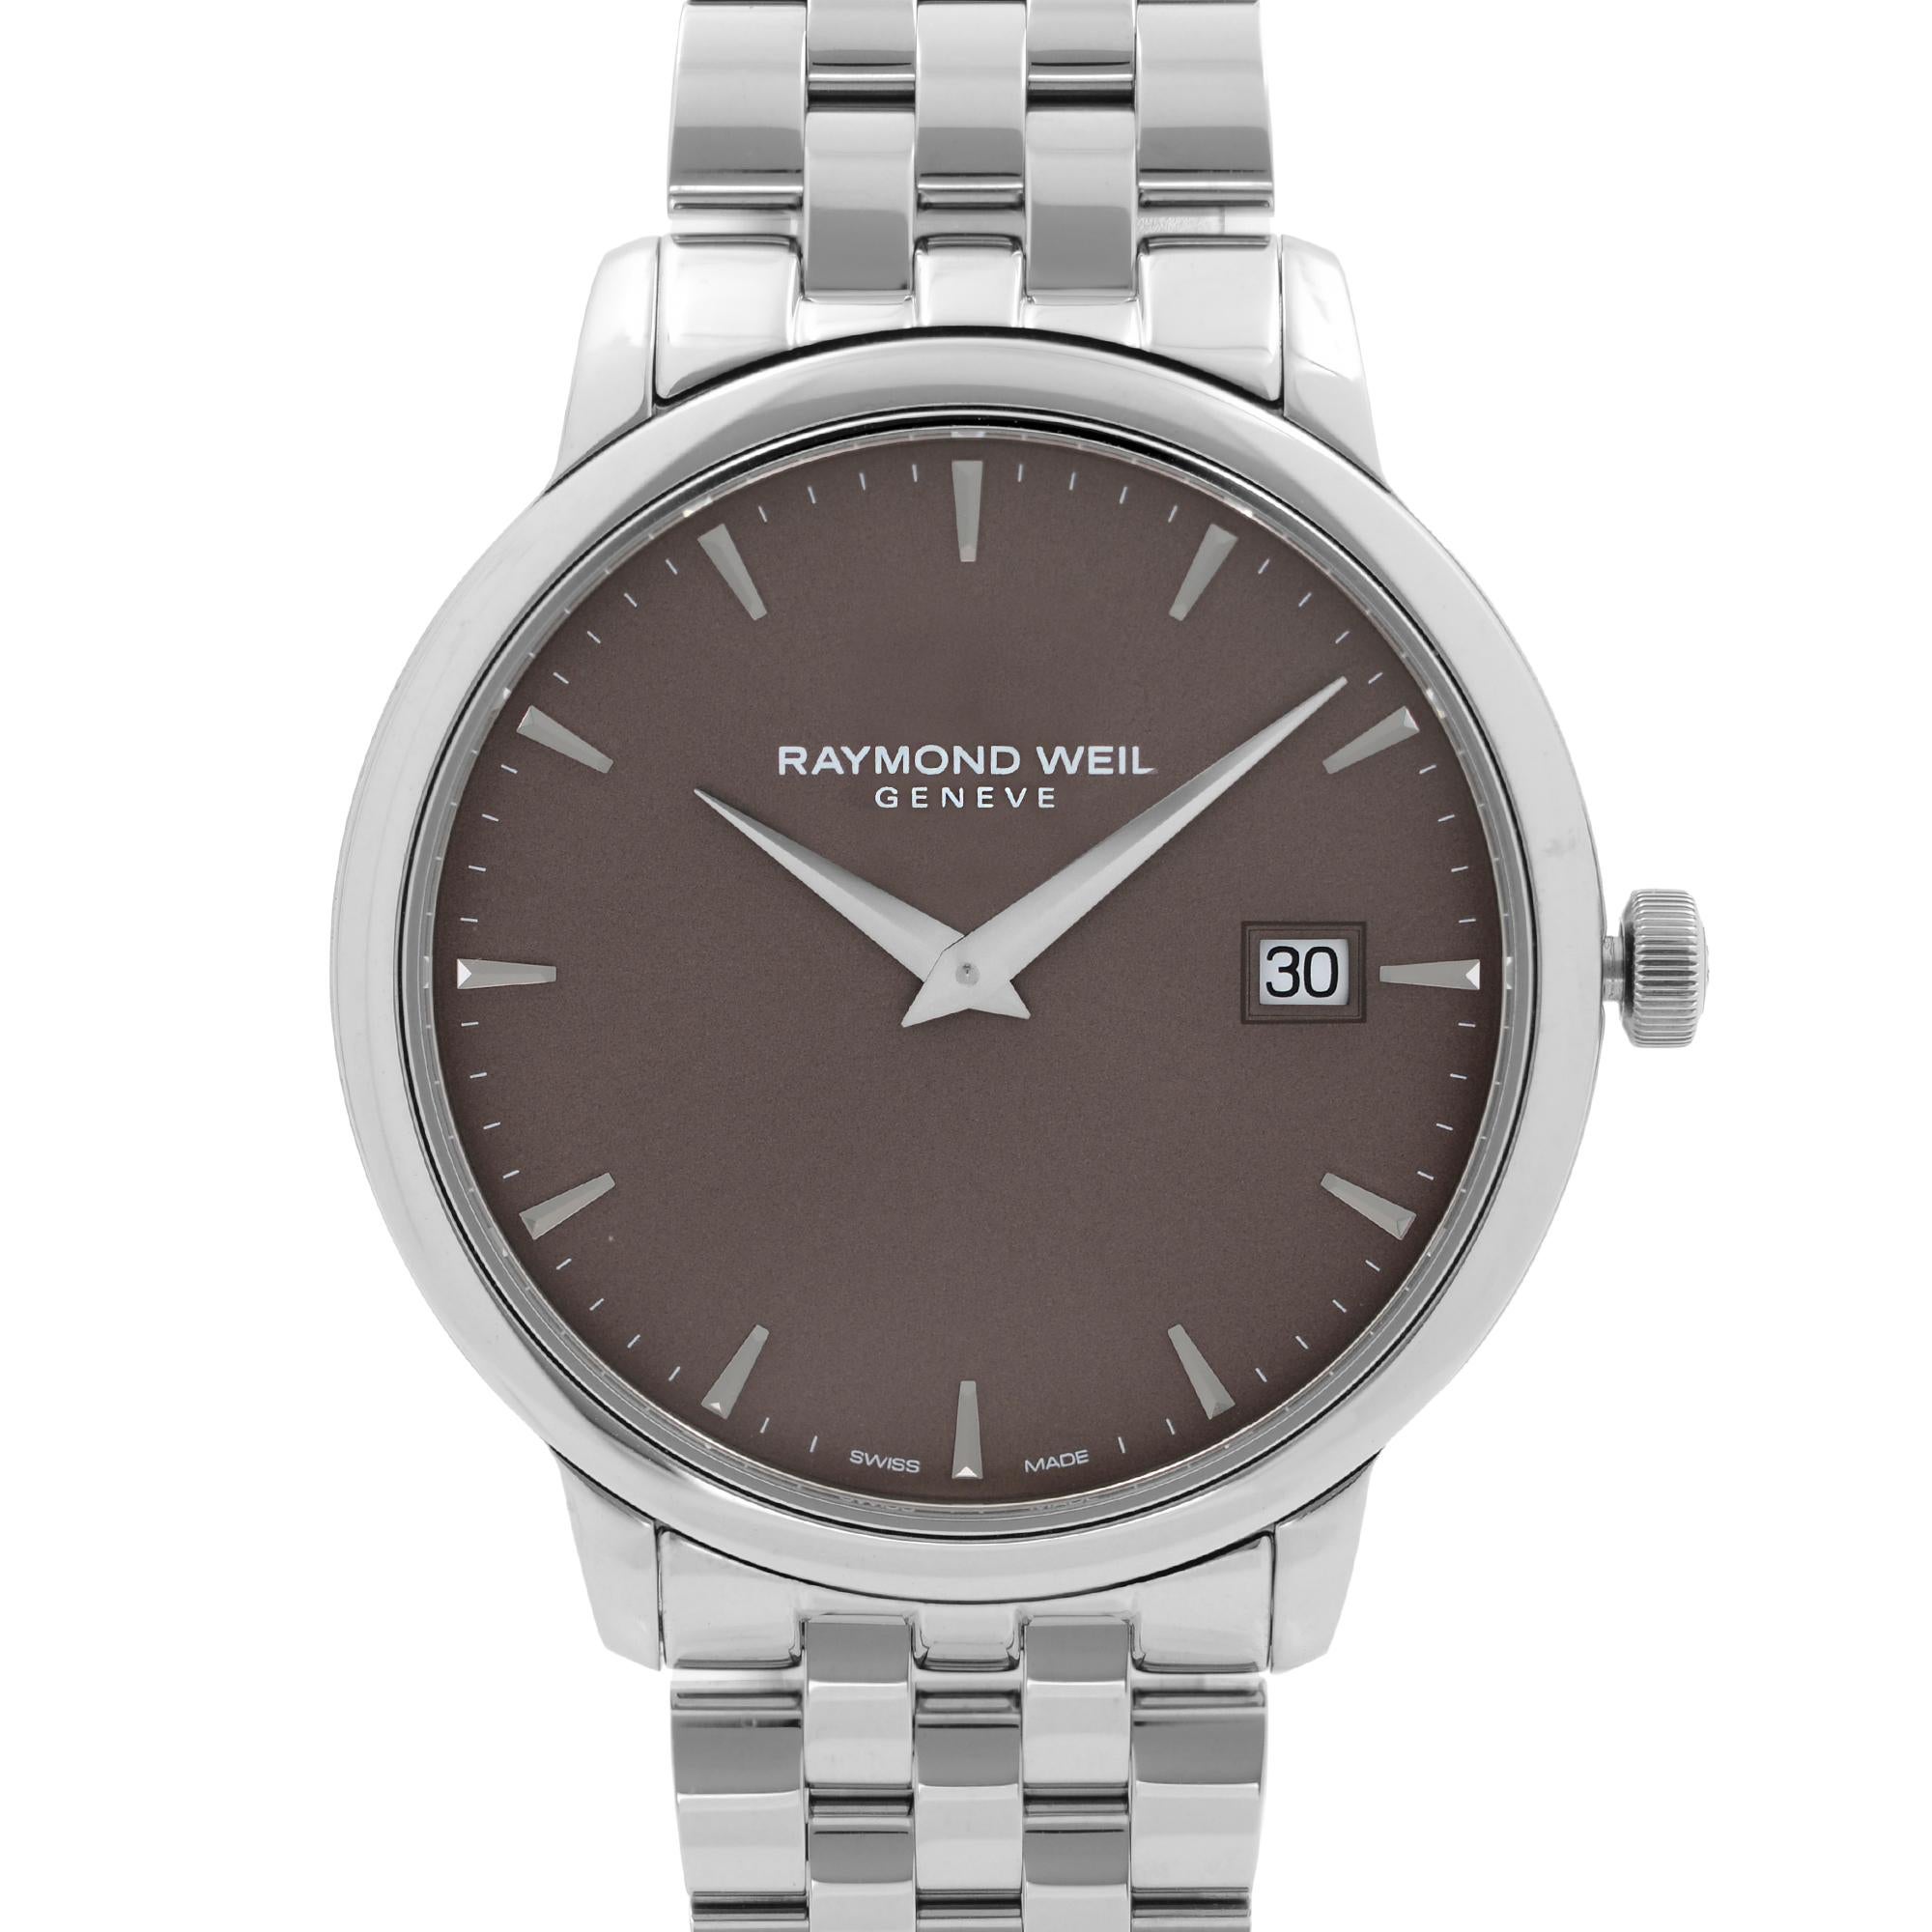 Never Worn Raymond Weil Toccata 39mm Steel Rare Brown Dial Quartz Men's Dress Watch 5488-ST-70001. This Beautiful Timepiece Features: Stainless Steel Case and Bracelet, Fixed Stainless Steel Bezel, Brown Dial with Silver-Tone Hands, And Index Hour